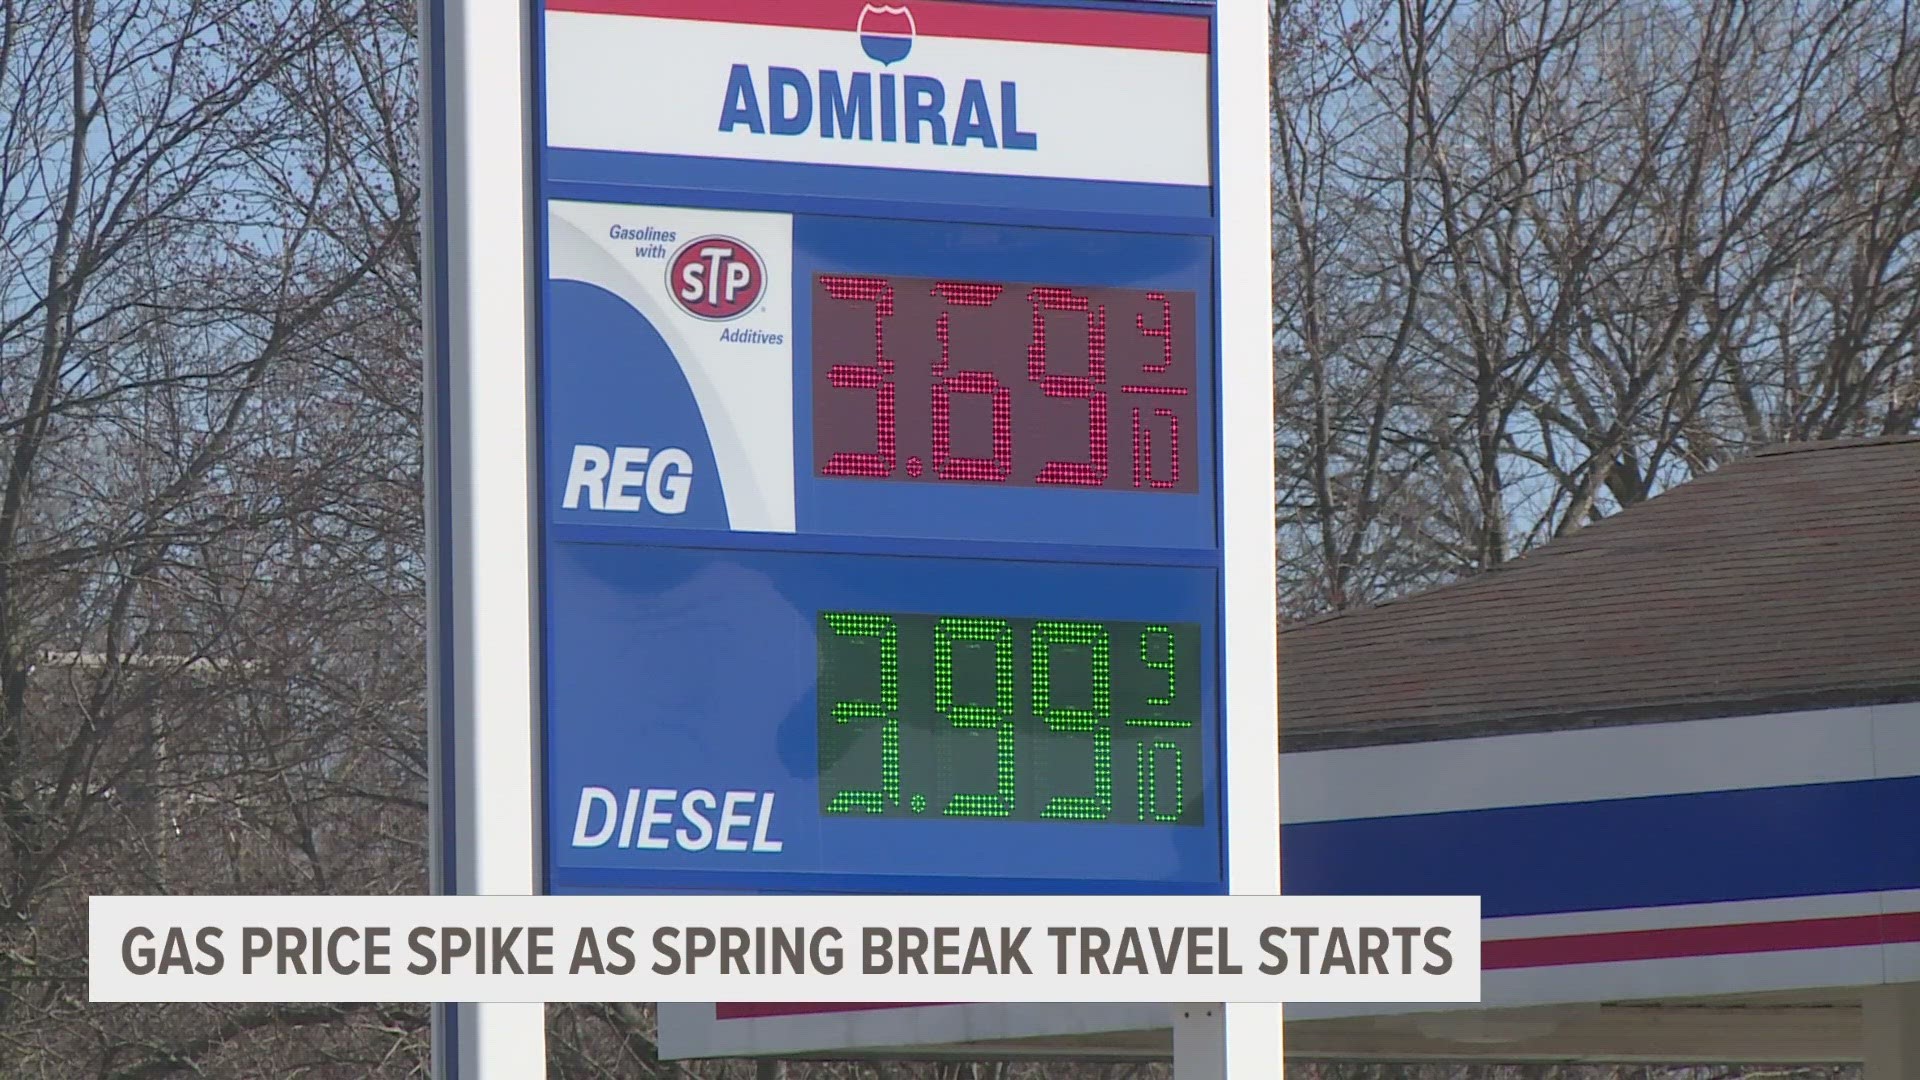 Planning a road trip for Spring Break? You'll probably be met with higher gas prices at the pump. Shopping around could land you a better deal.